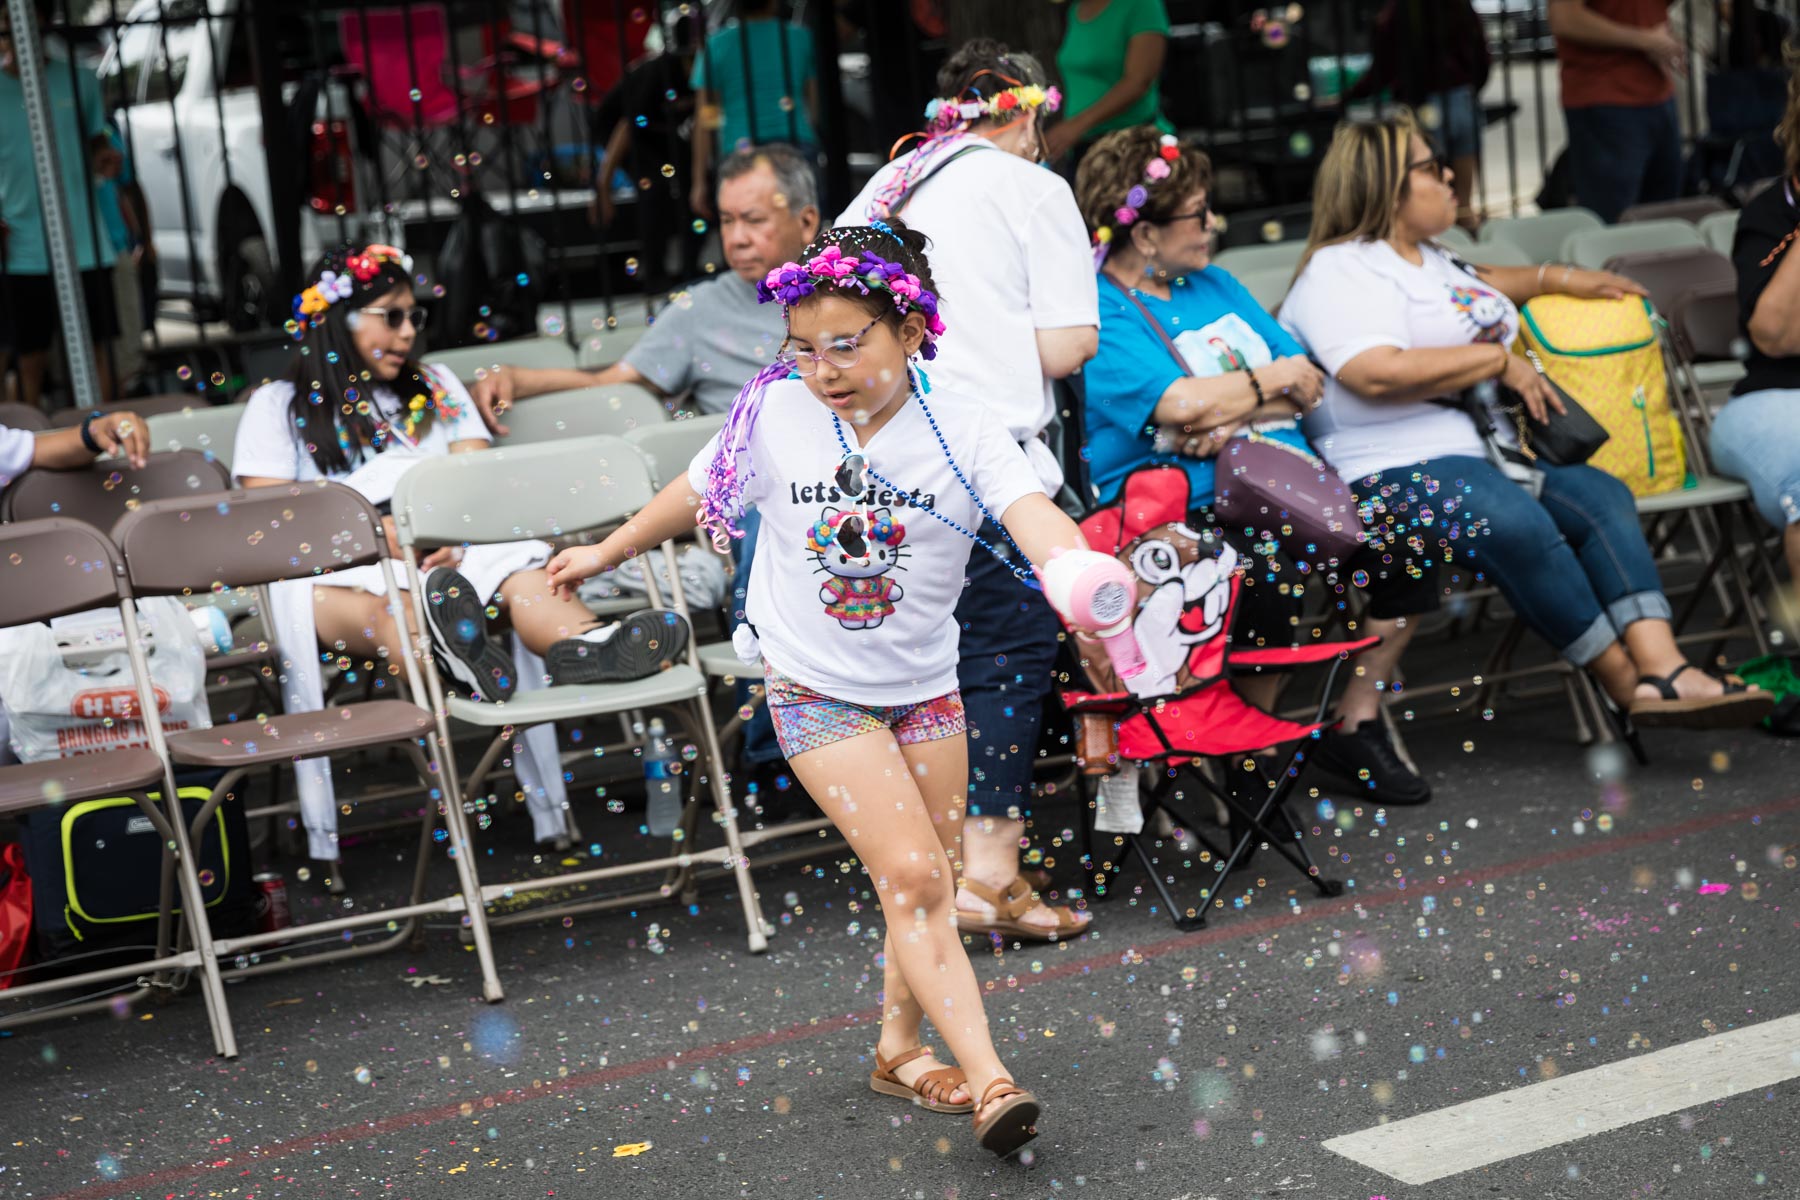 Little girl spinning in front of chair and blowing bubbles for an article on the Fiesta photo tips